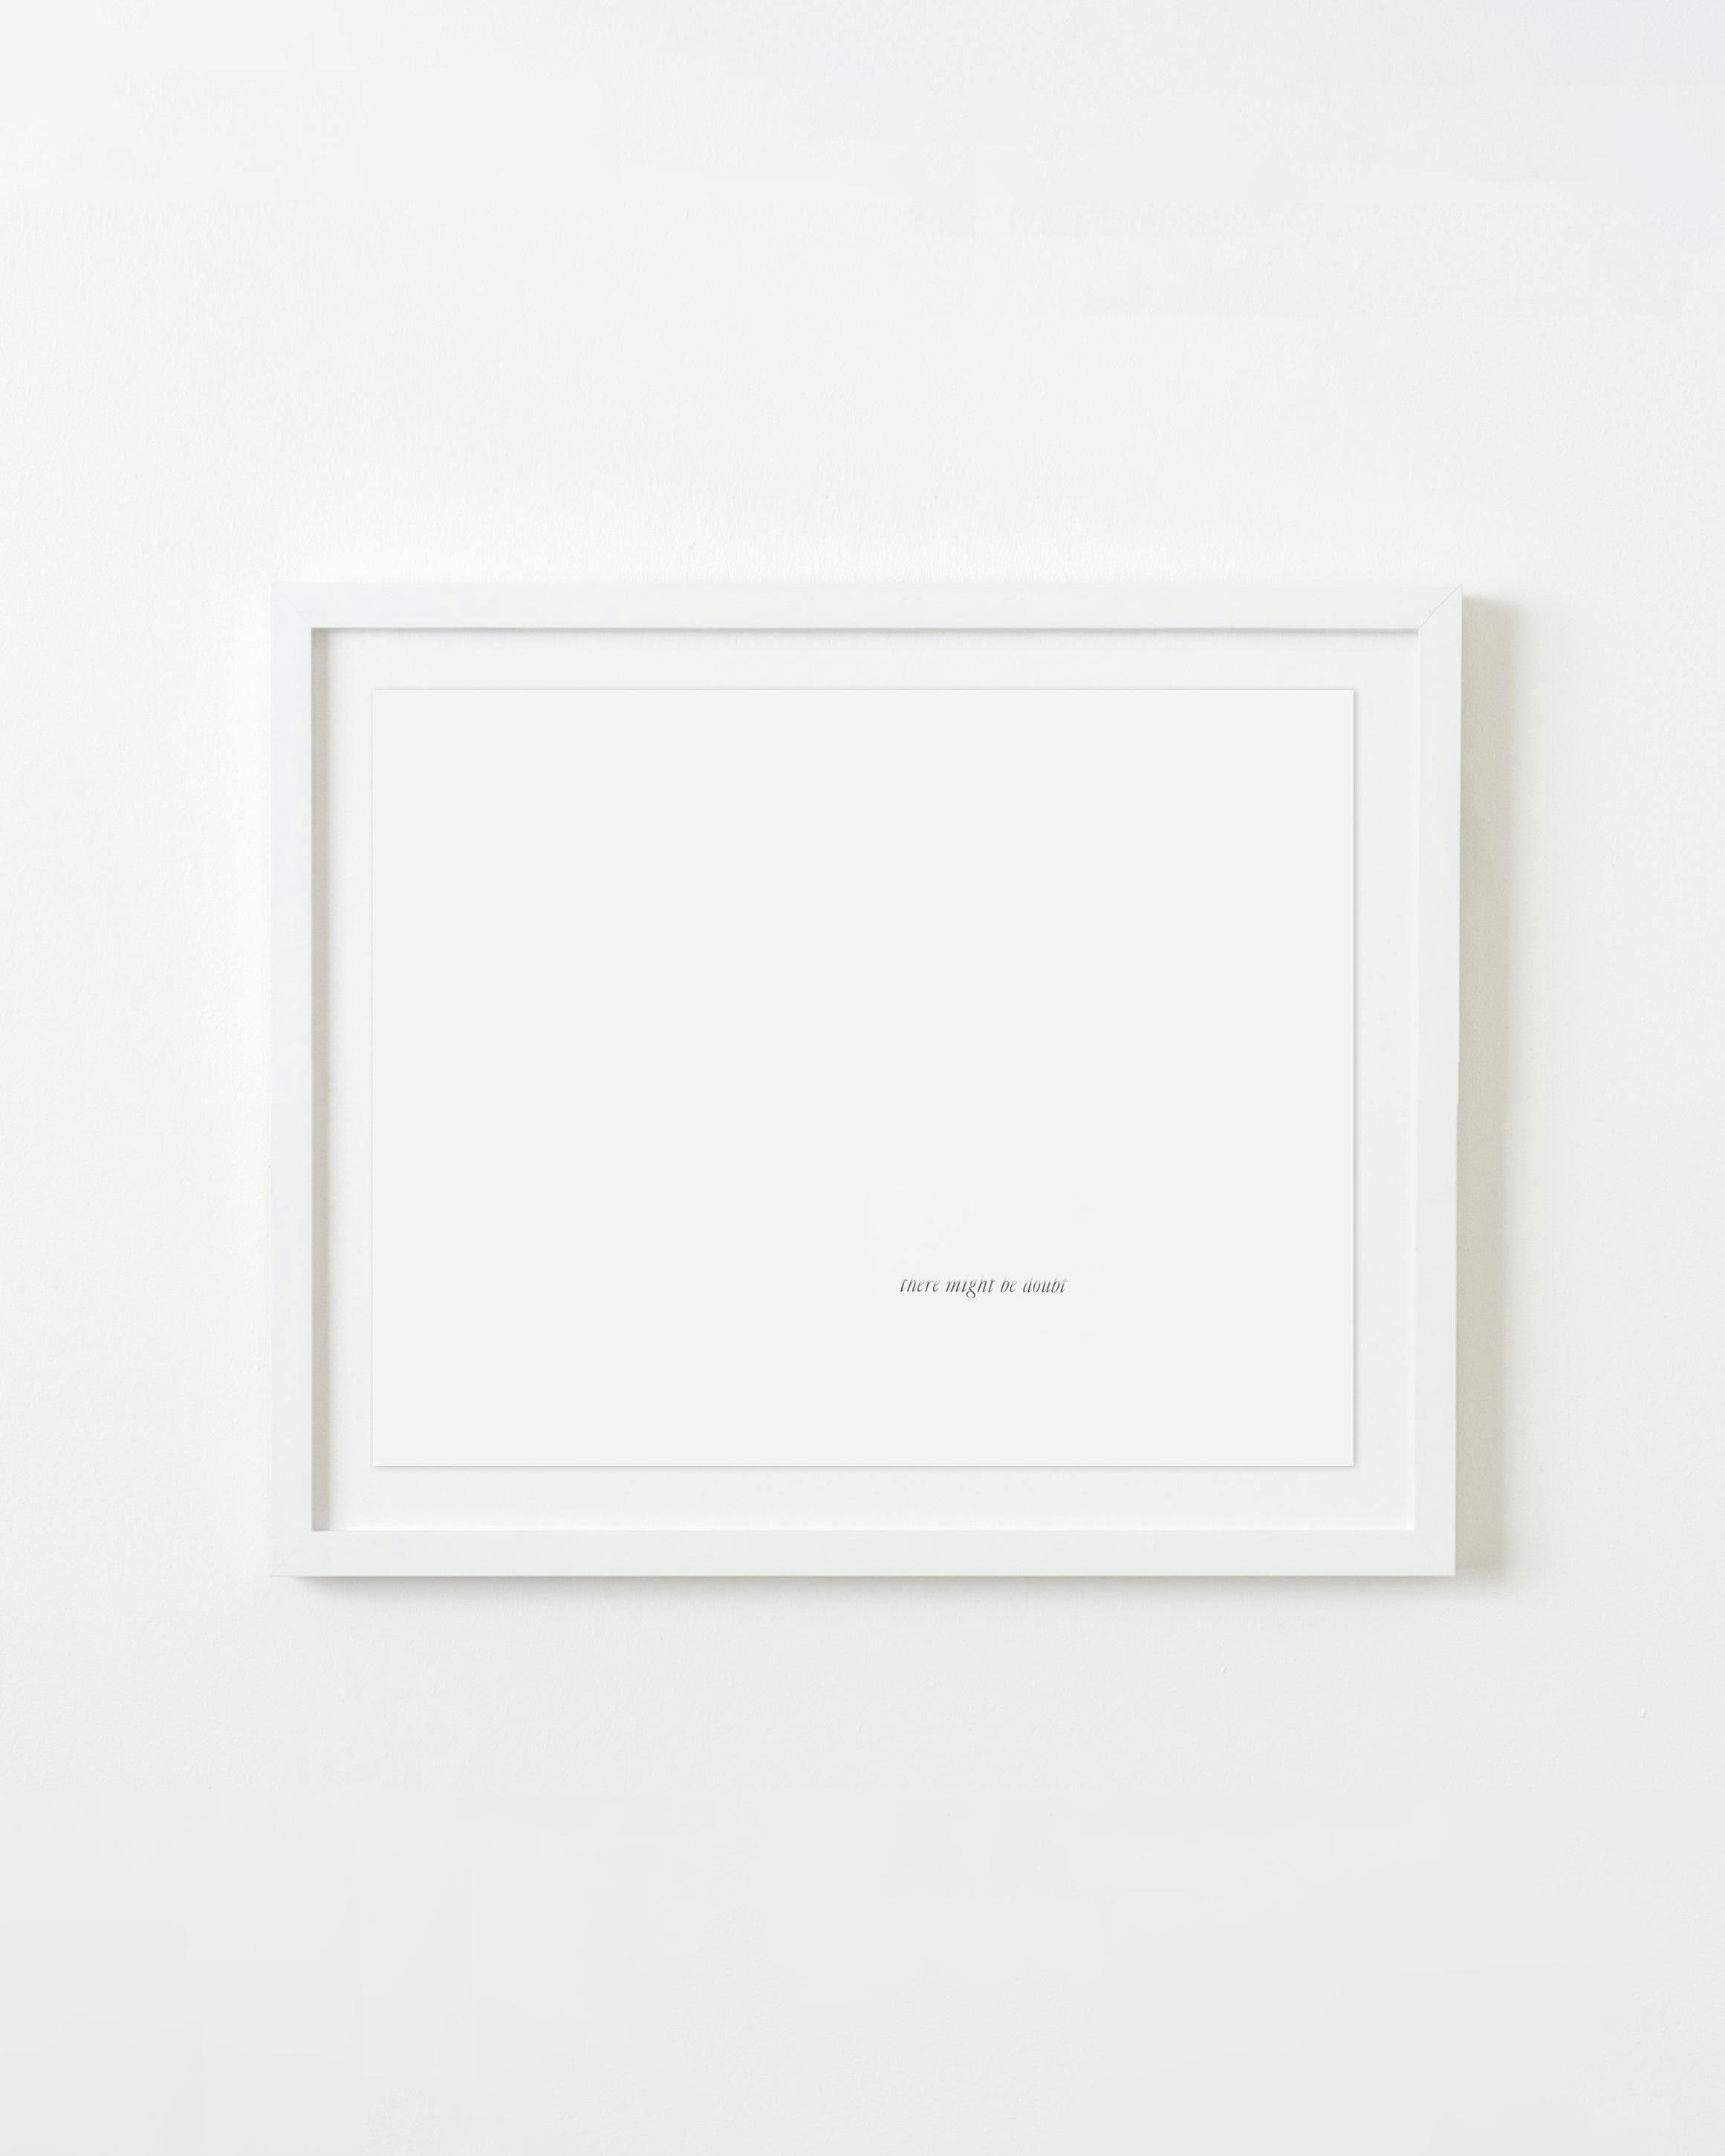 Alyson Provax - Untitled (there might be doubt) - Print